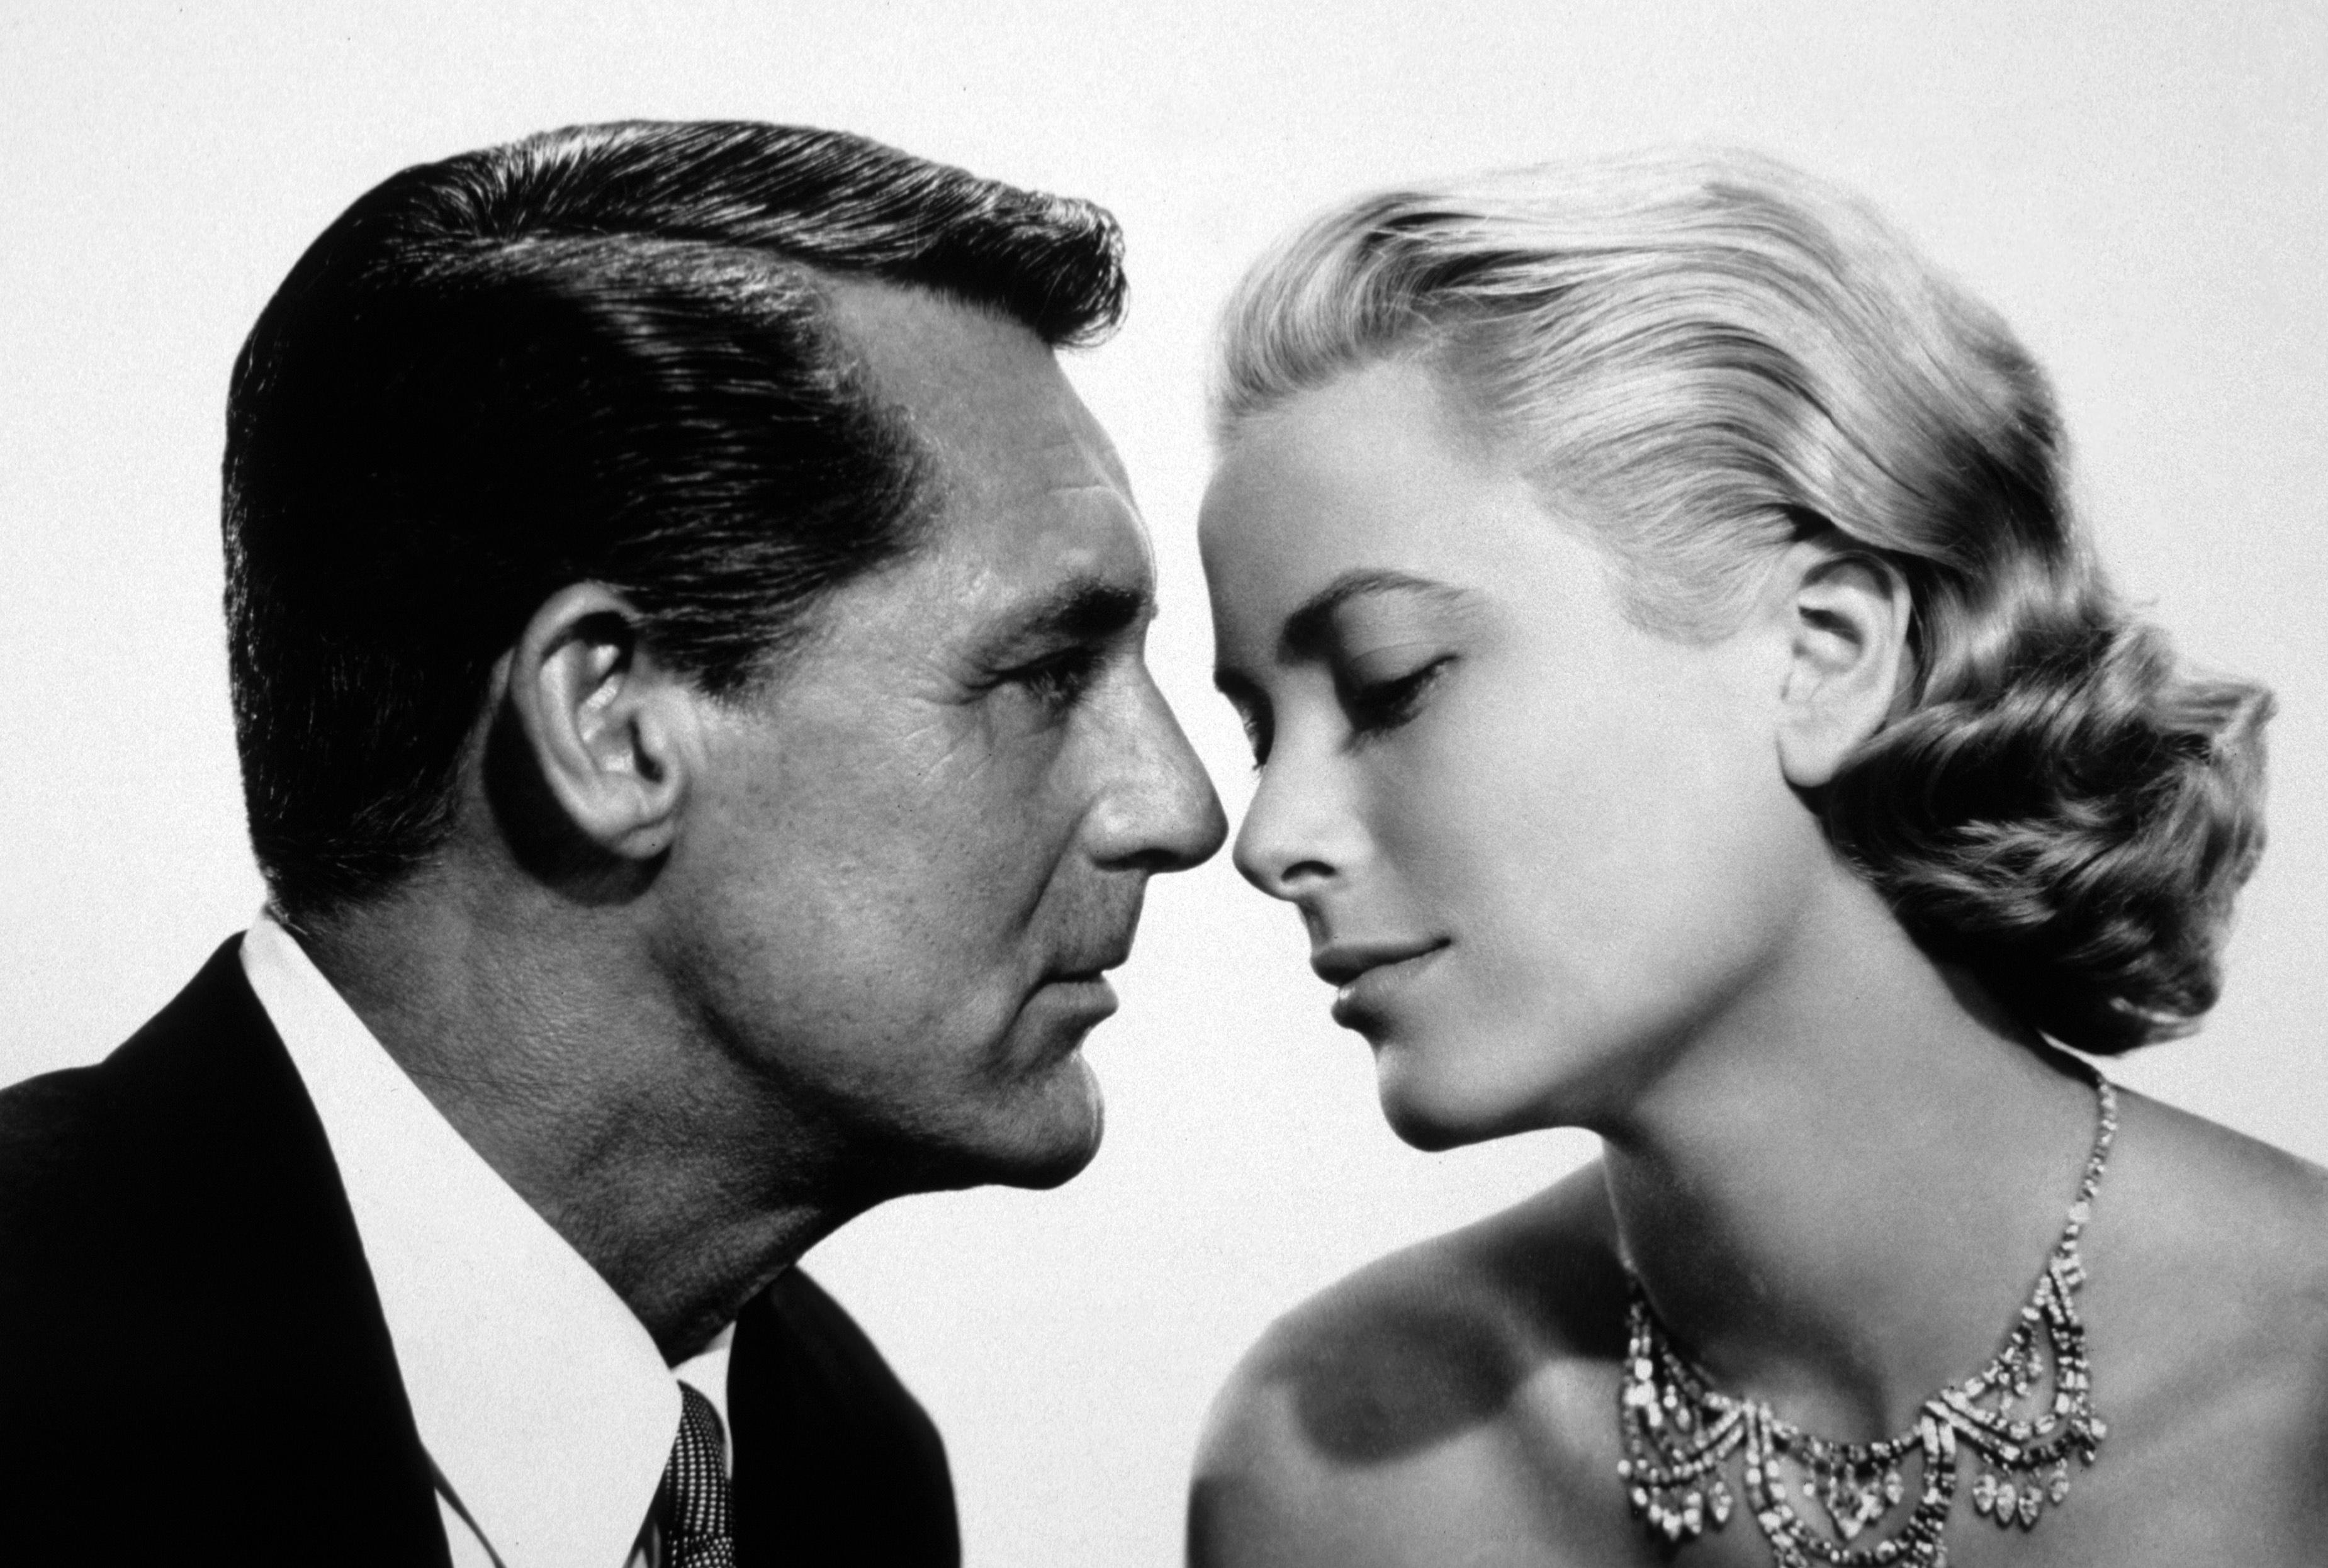 Unknown Portrait Photograph - Cary Grant and Grace Kelly "To Catch a Thief" Globe Photos Fine Art Print